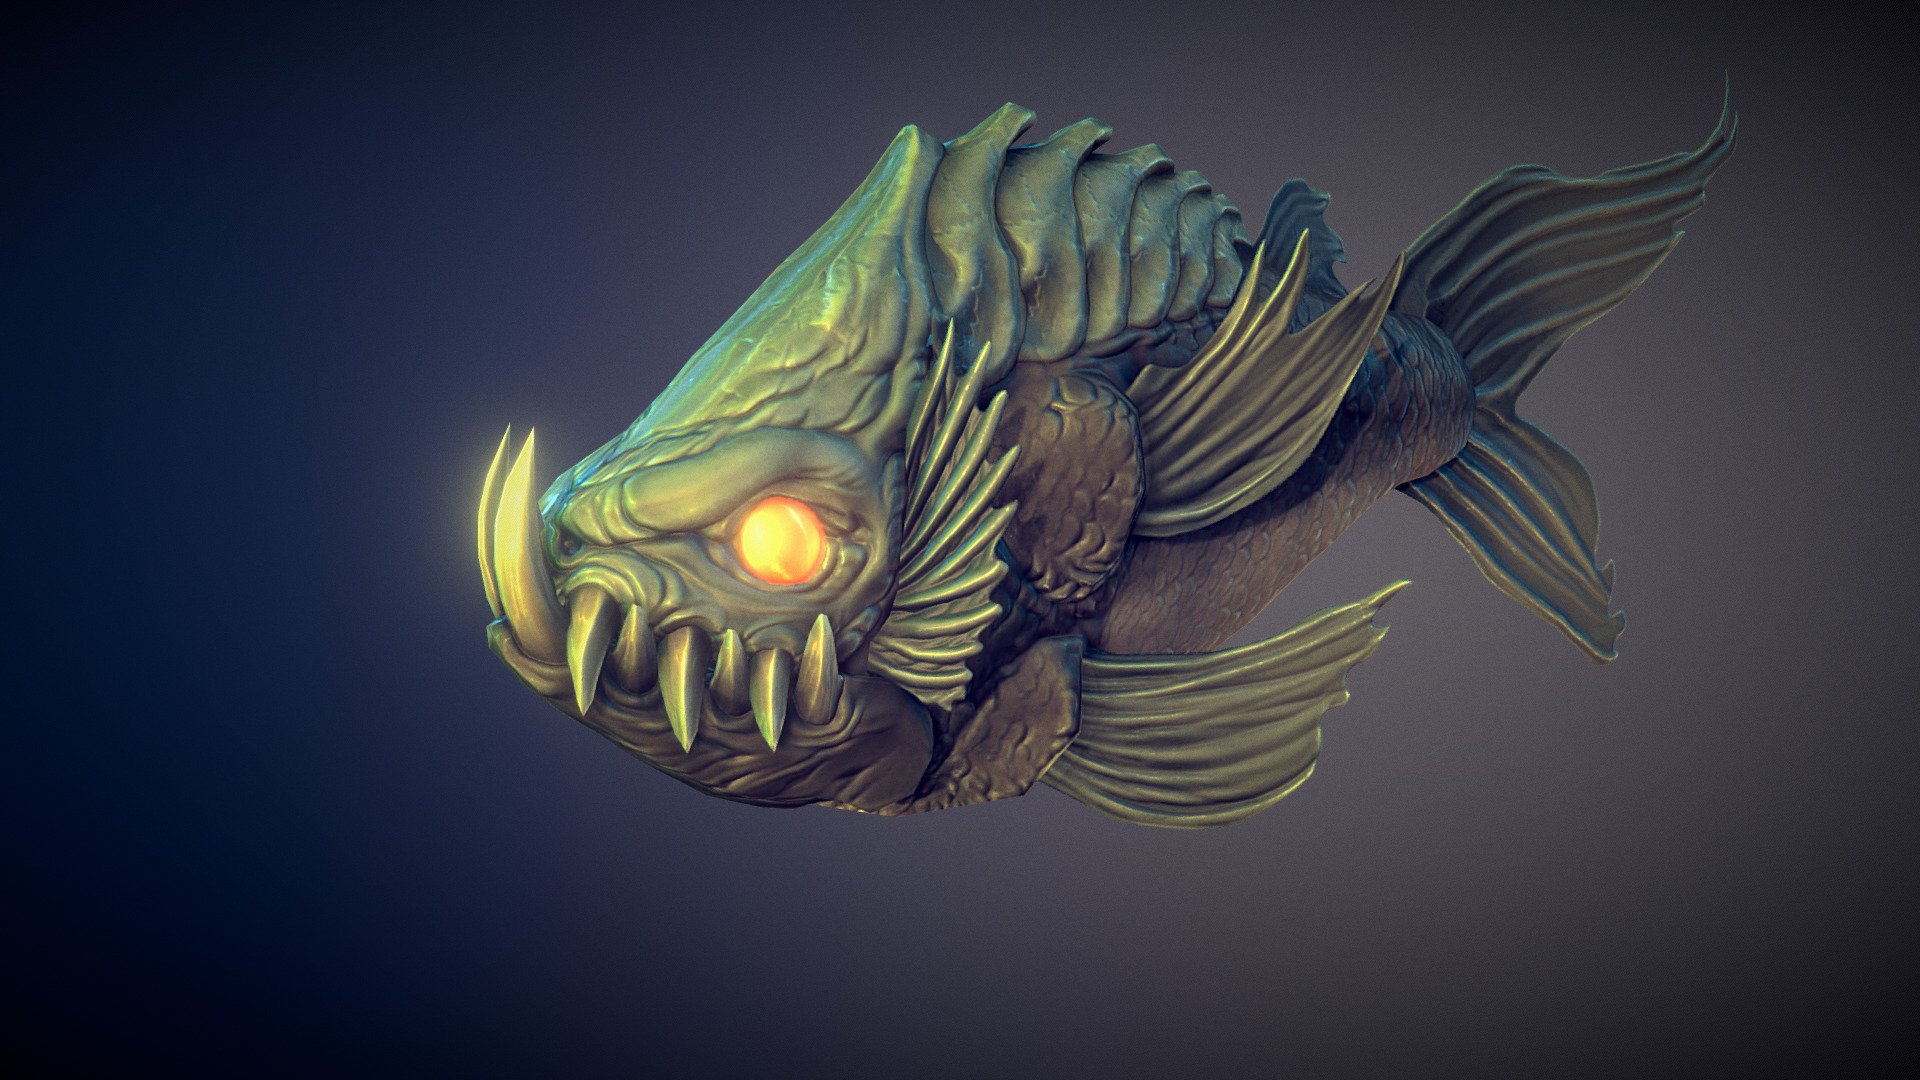 Angry Fish - 3D Model By Toomanydemons (@Toomanydemons) [8F5Aa59]